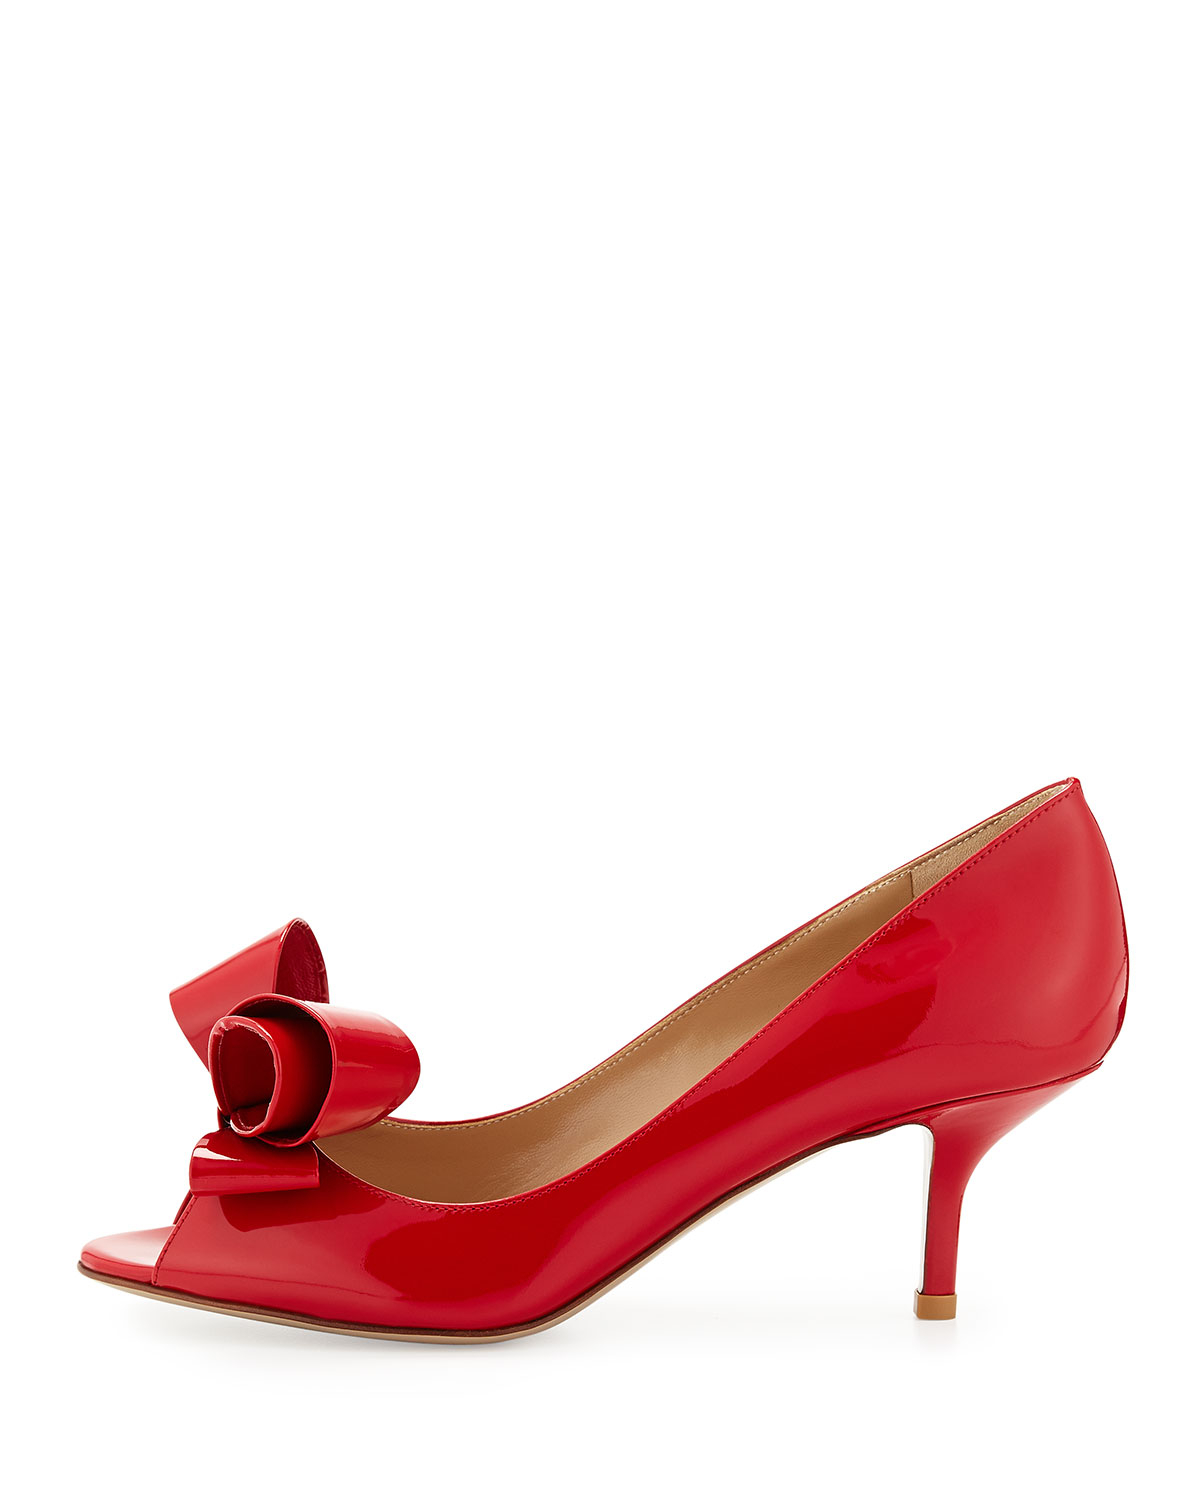 Lyst - Valentino Patent Bow Low-Heel Pump in Red